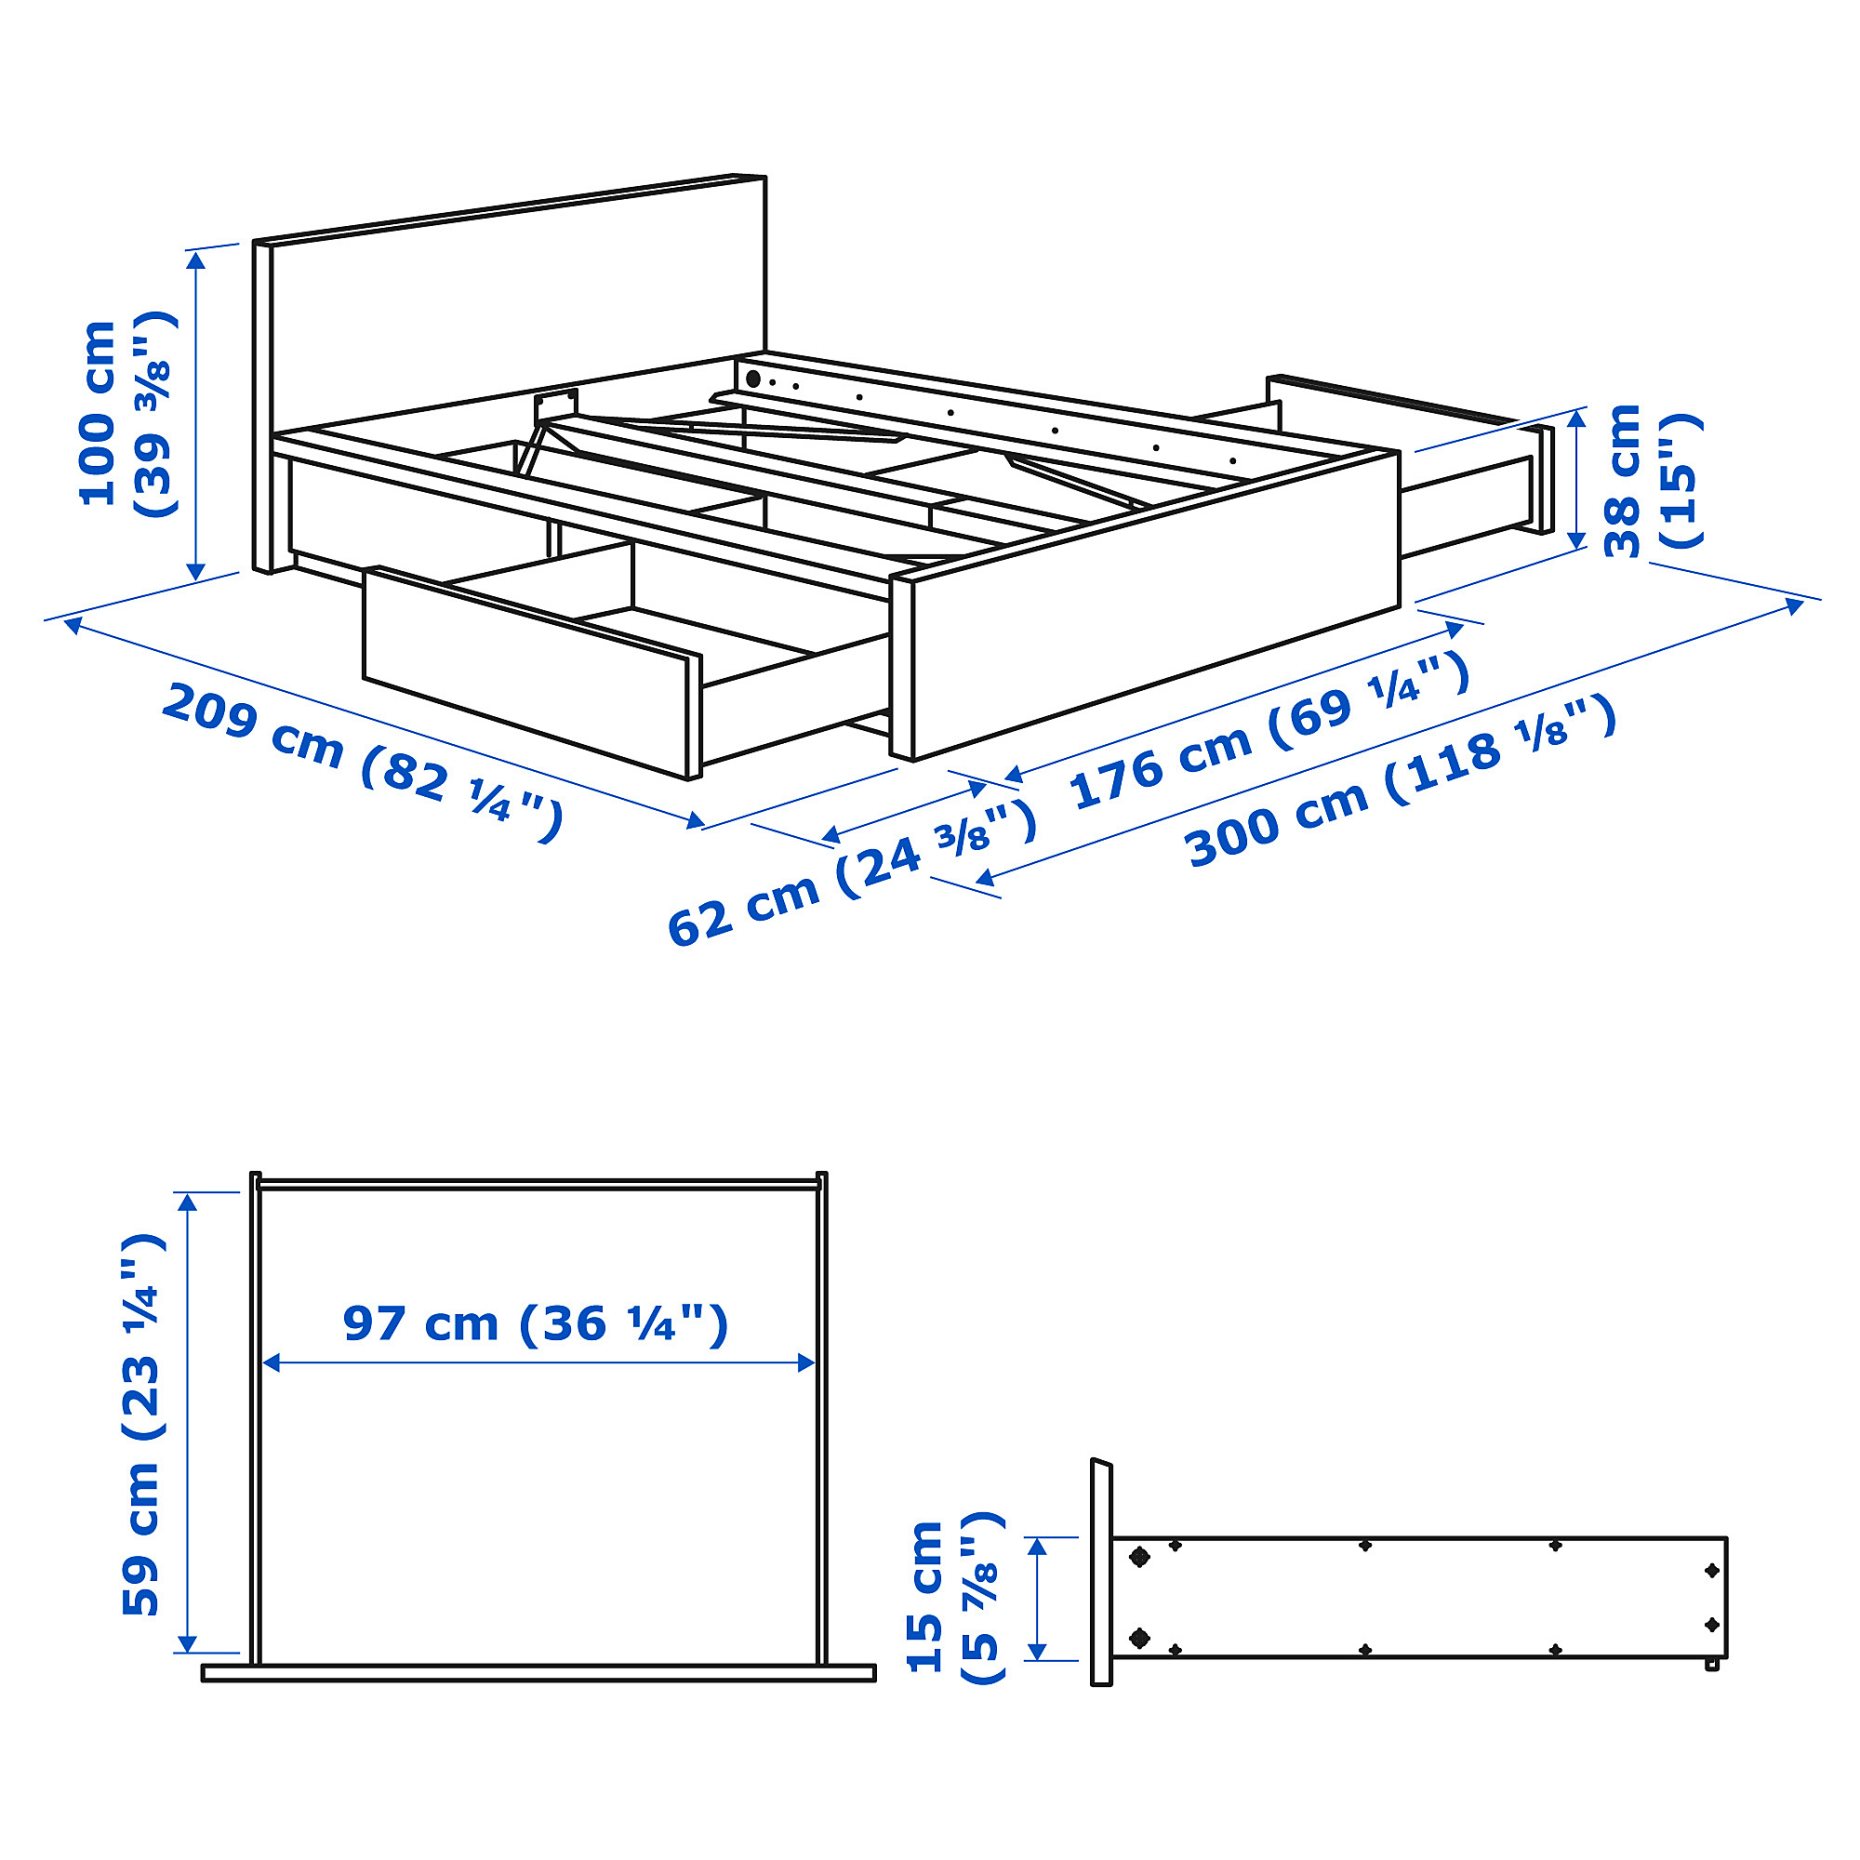 MALM, bed frame/high with 4 storage boxes, 160X200 cm, 594.950.18